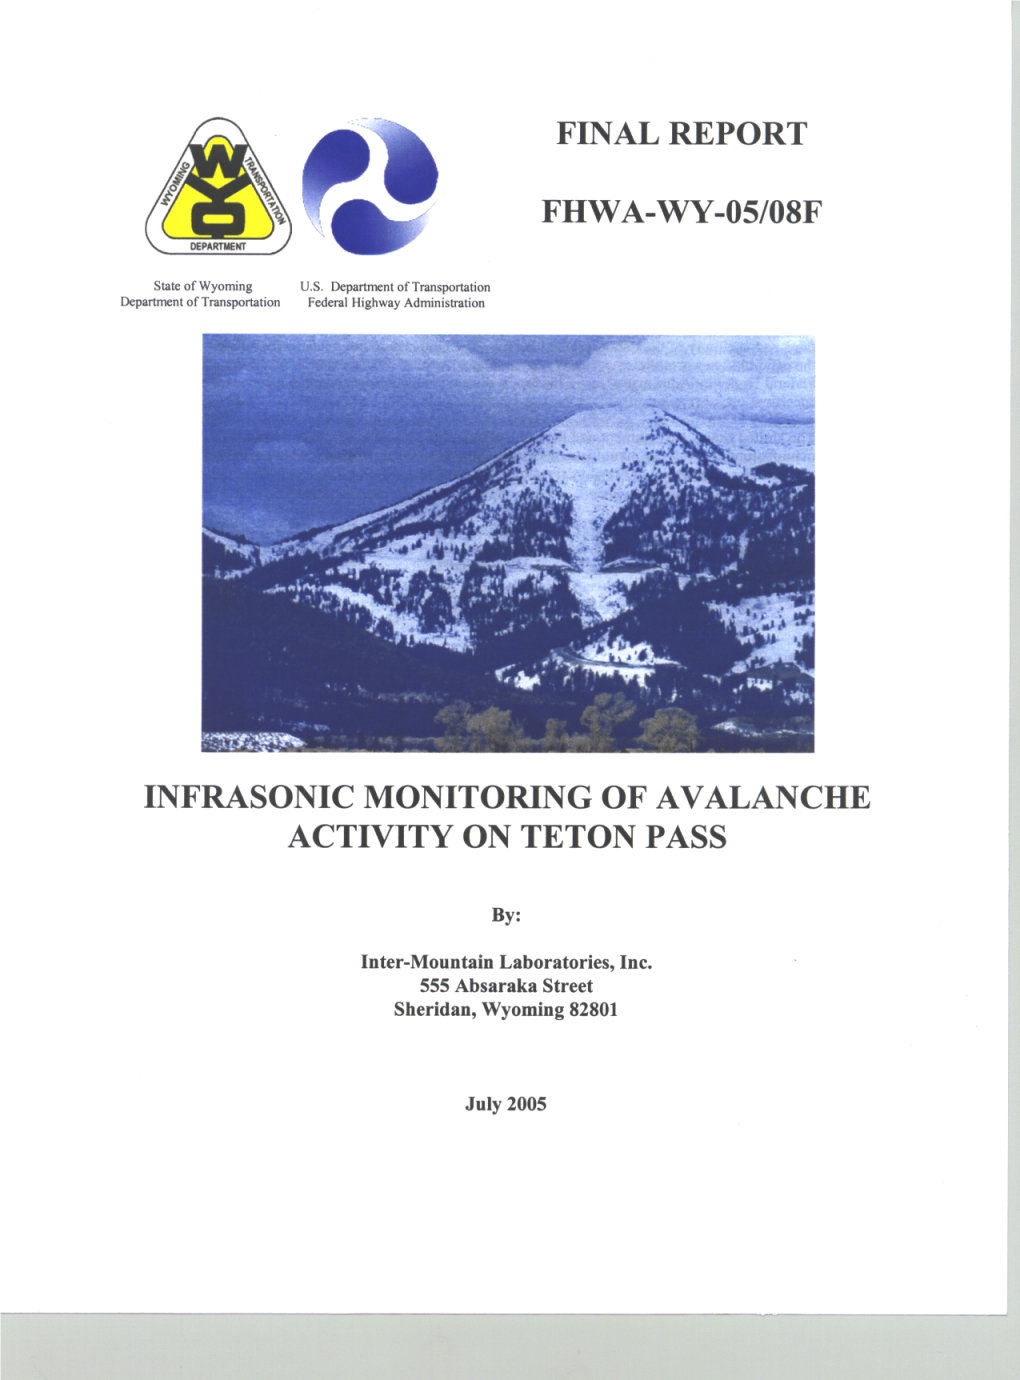 RS07203 0508F Infrasonic Monitoring of Avalanche.Pdf